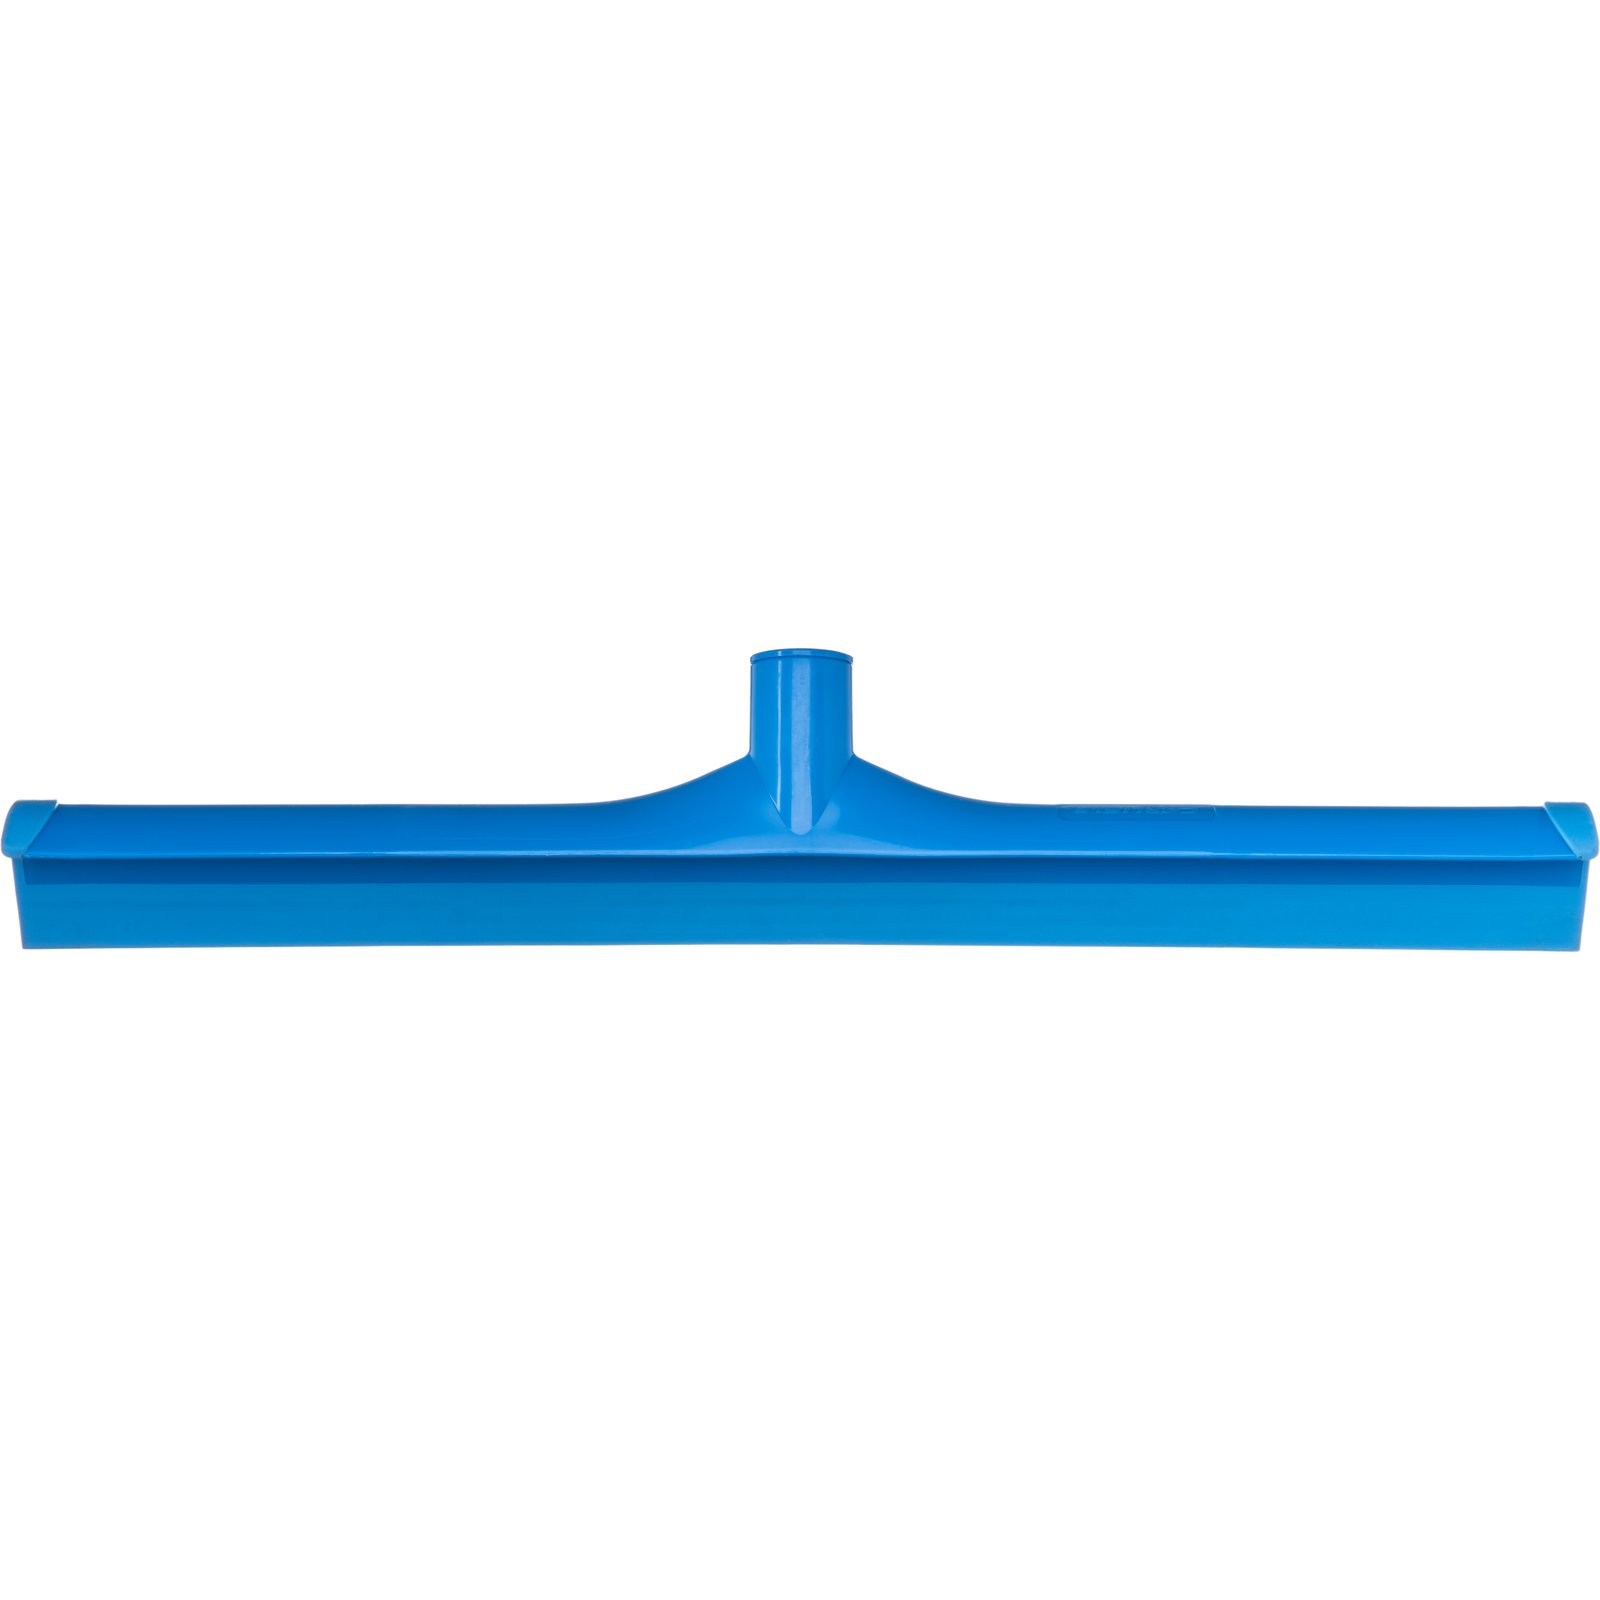 Clean Sweep Squeegee, Rolling Pin Squeegee - USCutter